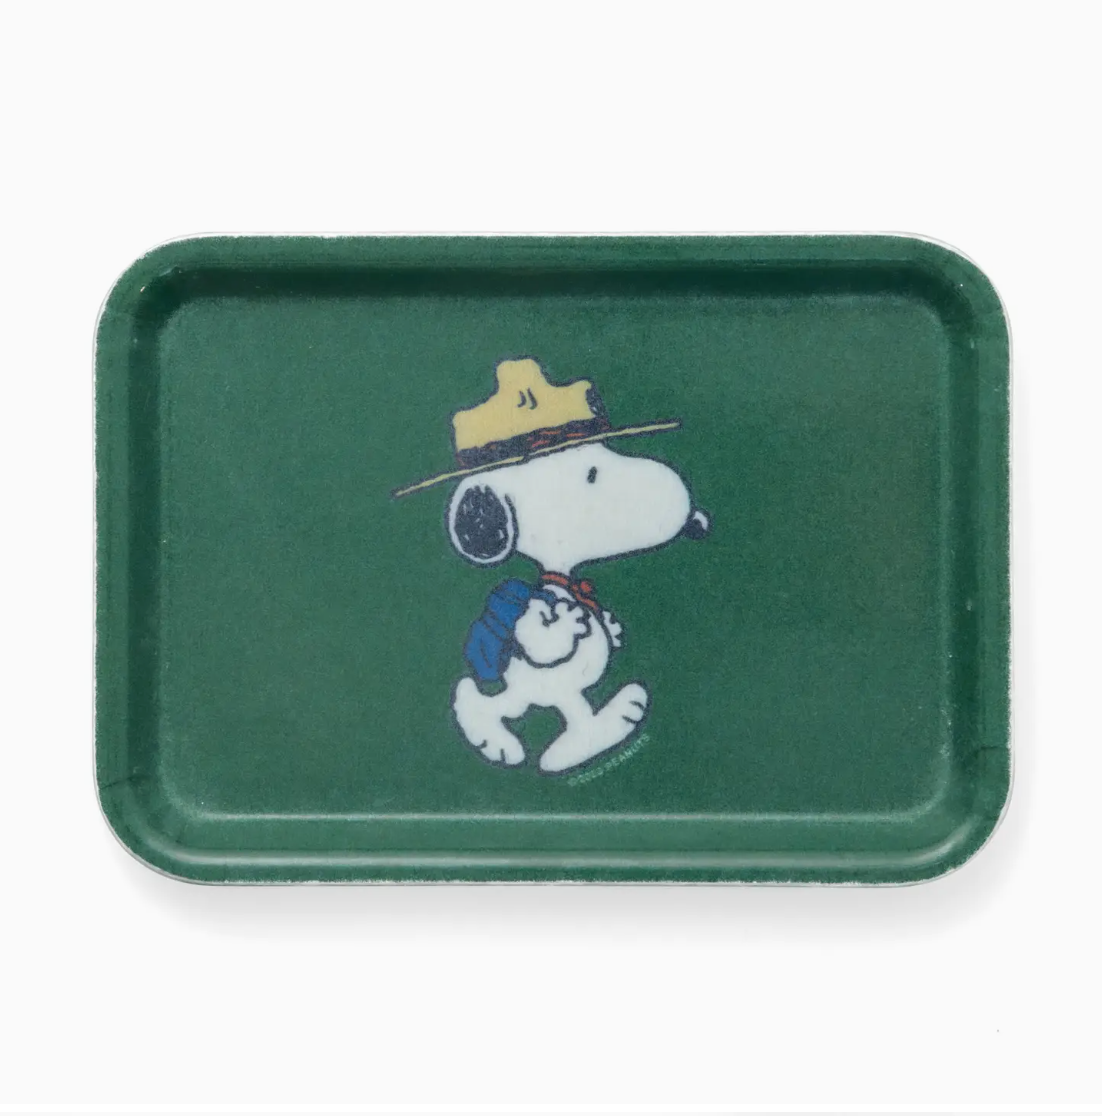 A rectangular tray with a green background featuring an illustration of Snoopy wearing a safari hat, holding Woodstock, with a white border around the image, reminiscent of Scottsdale Arizona.